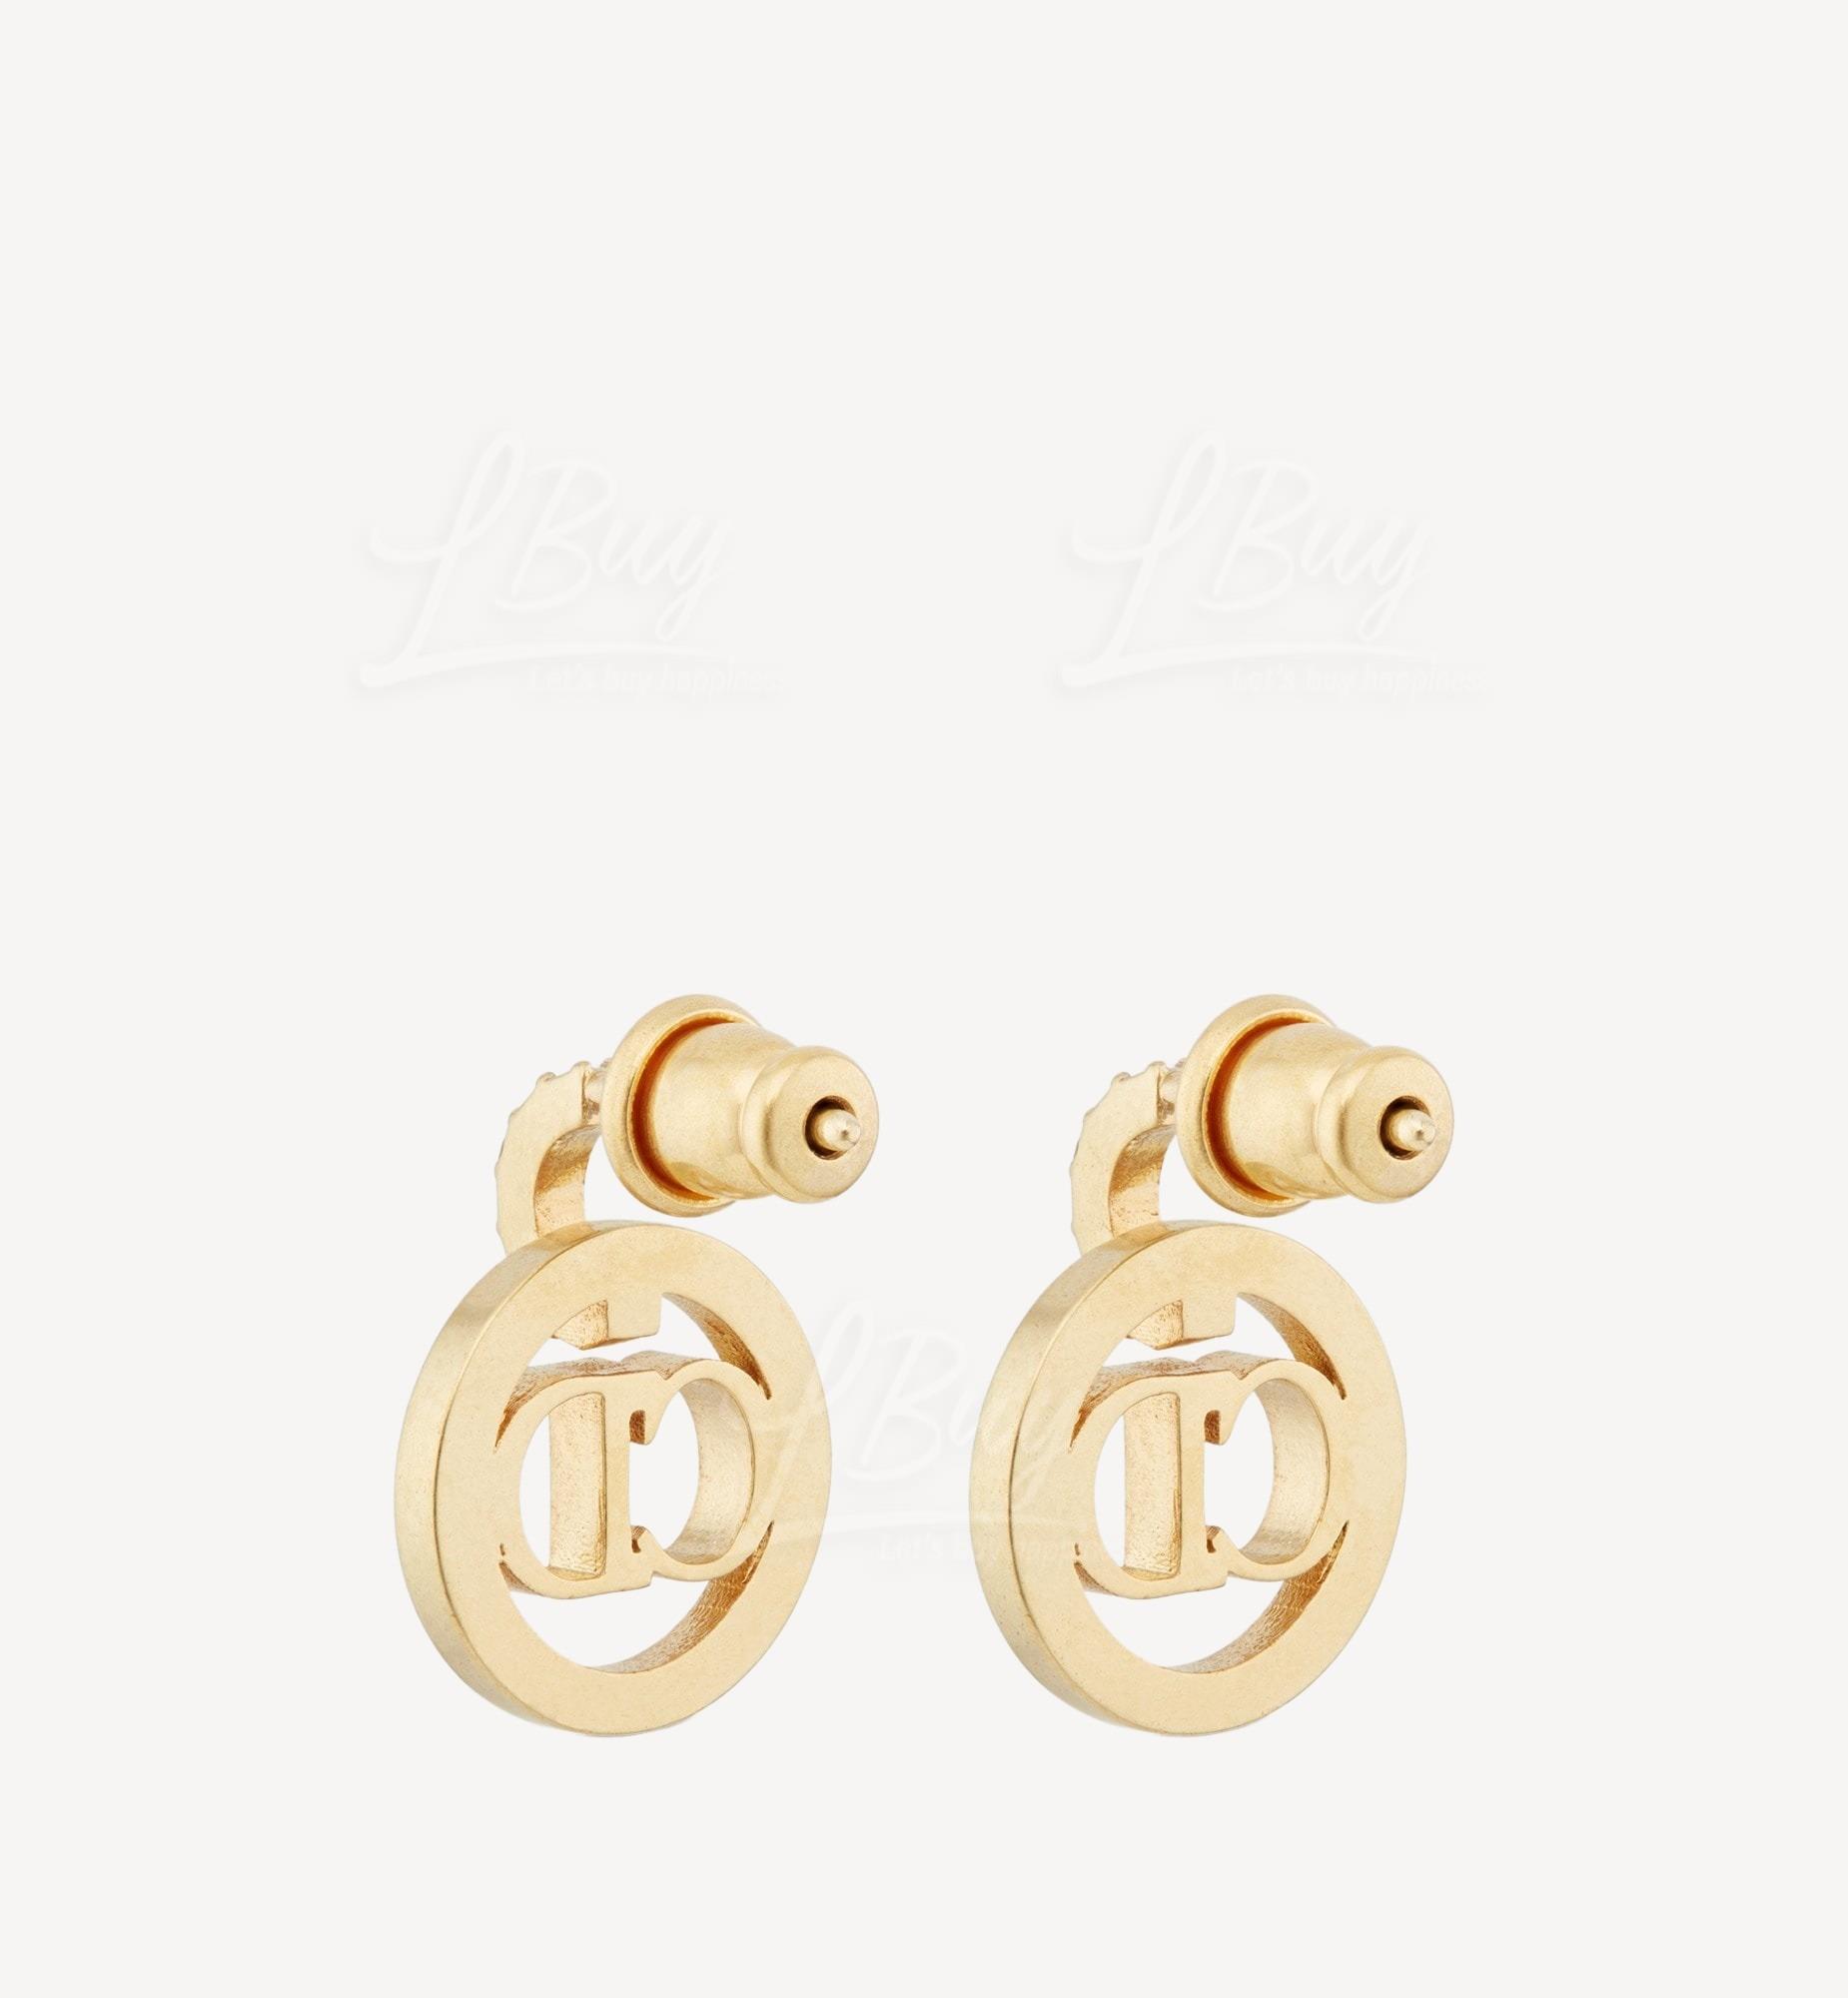 Clair D Lune Earrings GoldFinish Metal and White Crystals  DIOR SG